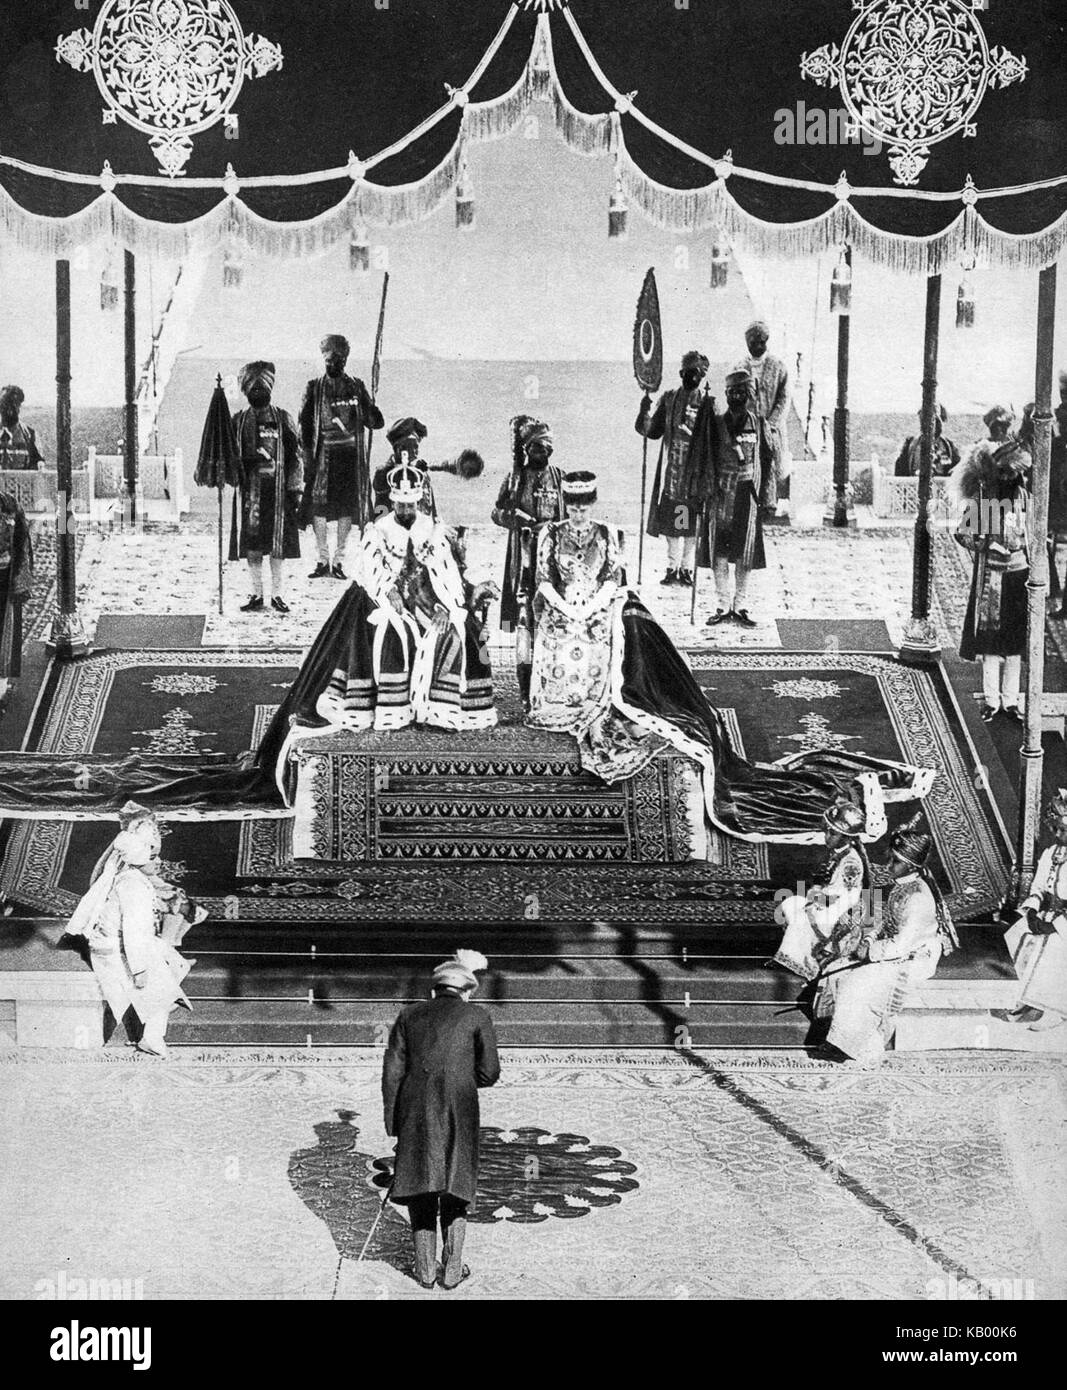 The Nizam of Hyderabad pays homage to the king and queen at the Delhi Durbar Stock Photo